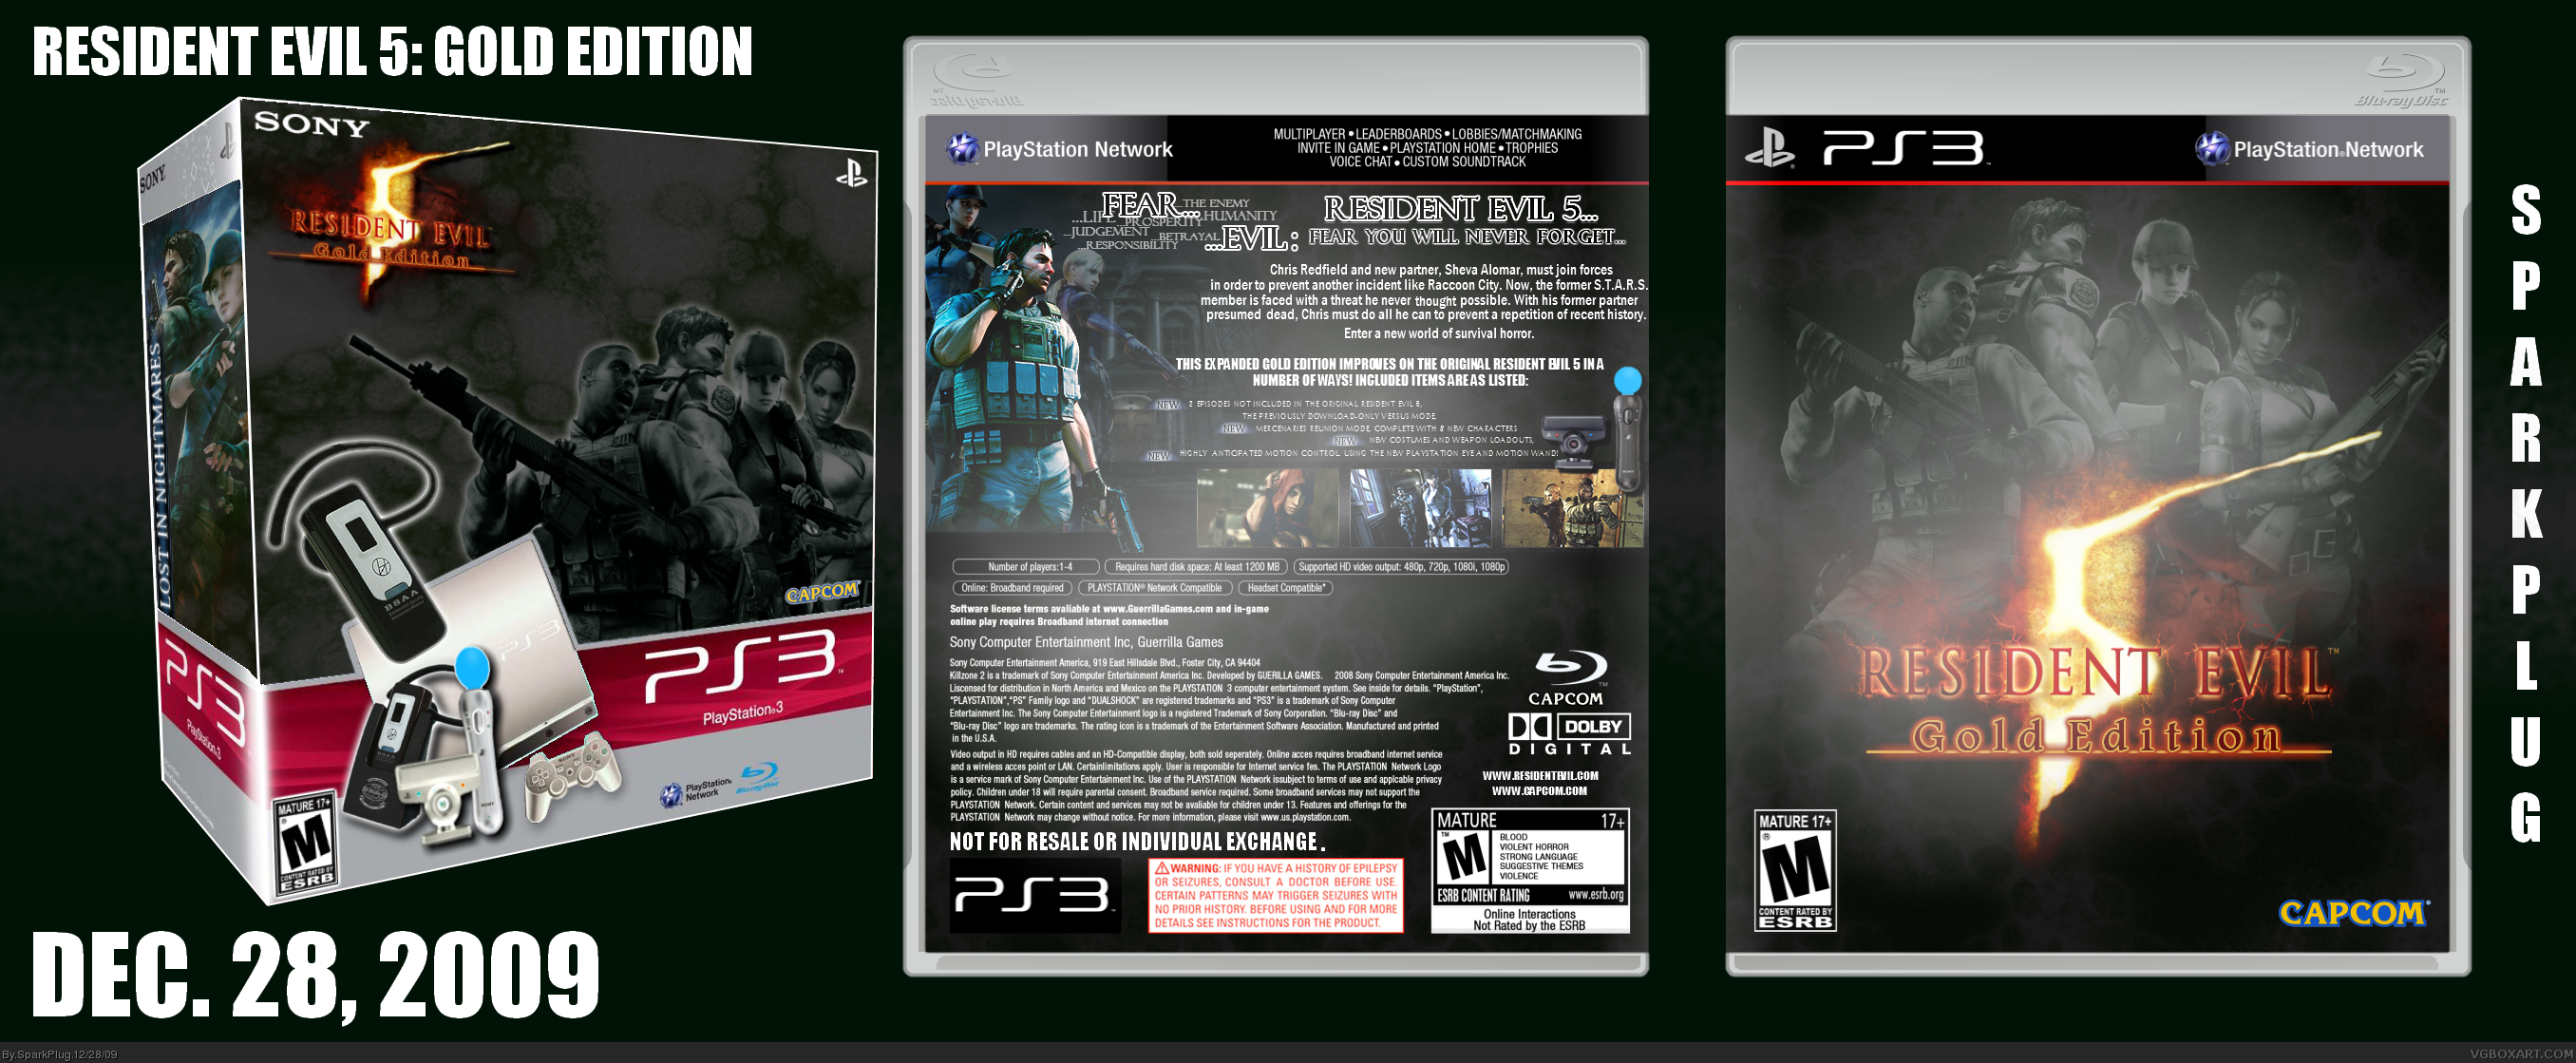 Resident Evil 5: Gold Edition Bundle box cover